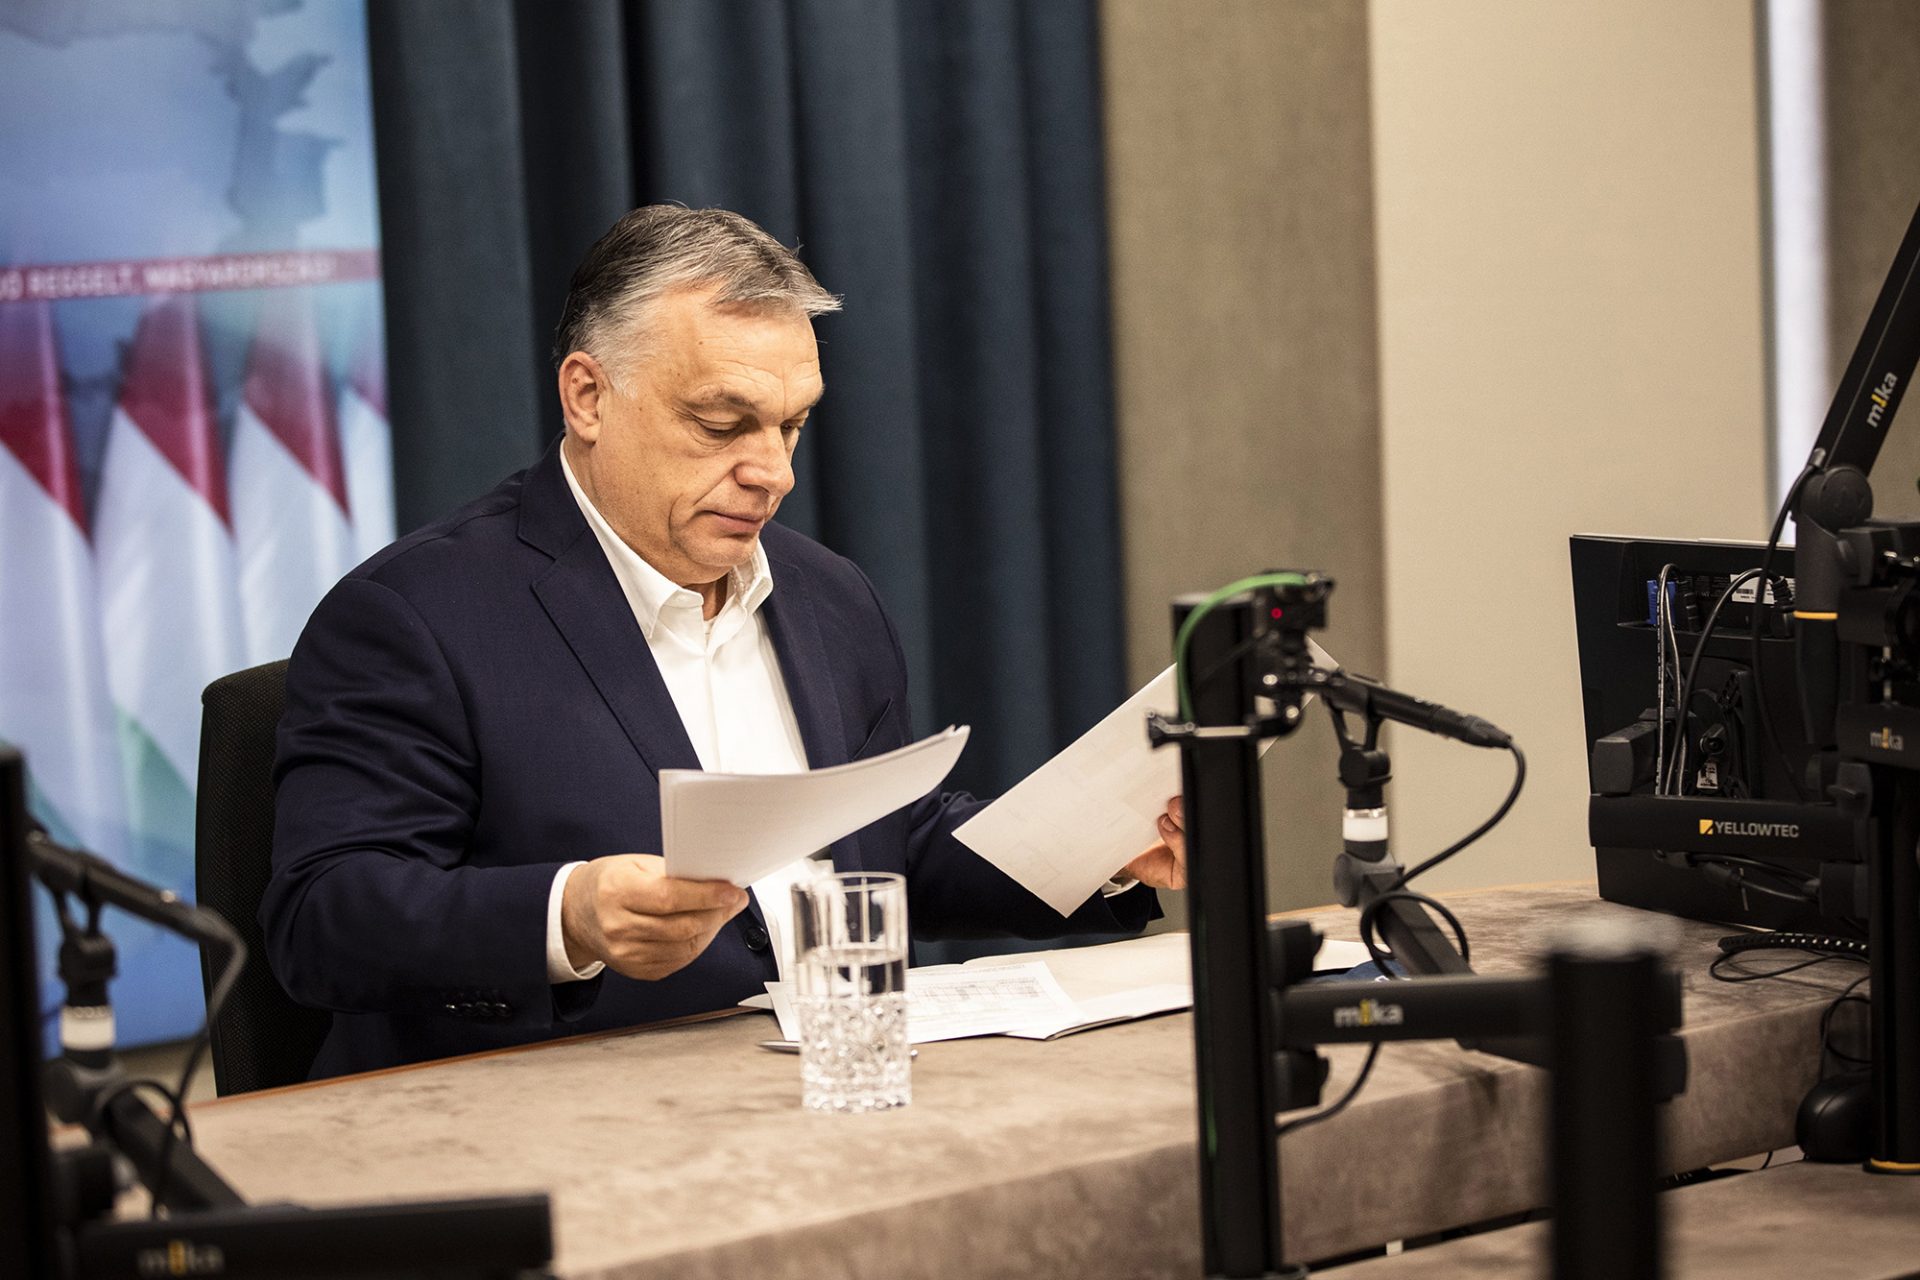 Orbán: Those campaigning with CEU's expulsion were not telling truth